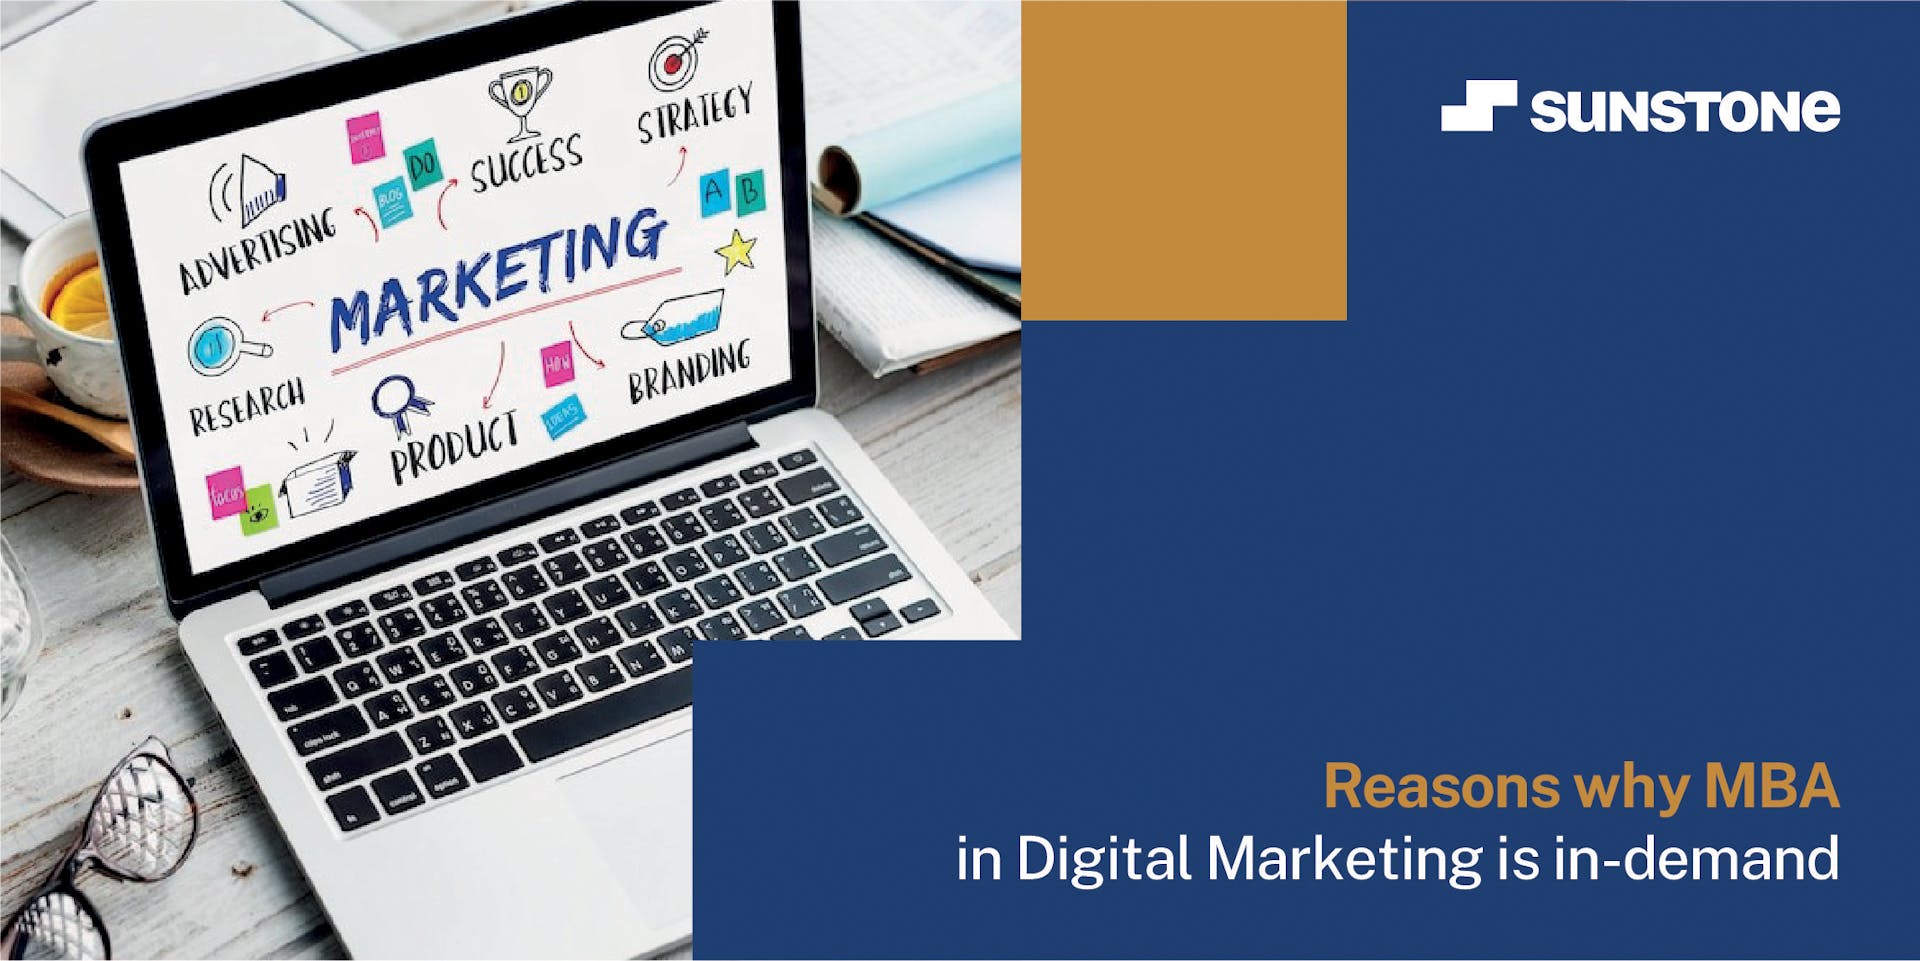 Why MBA in Digital Marketing in India is Popular?